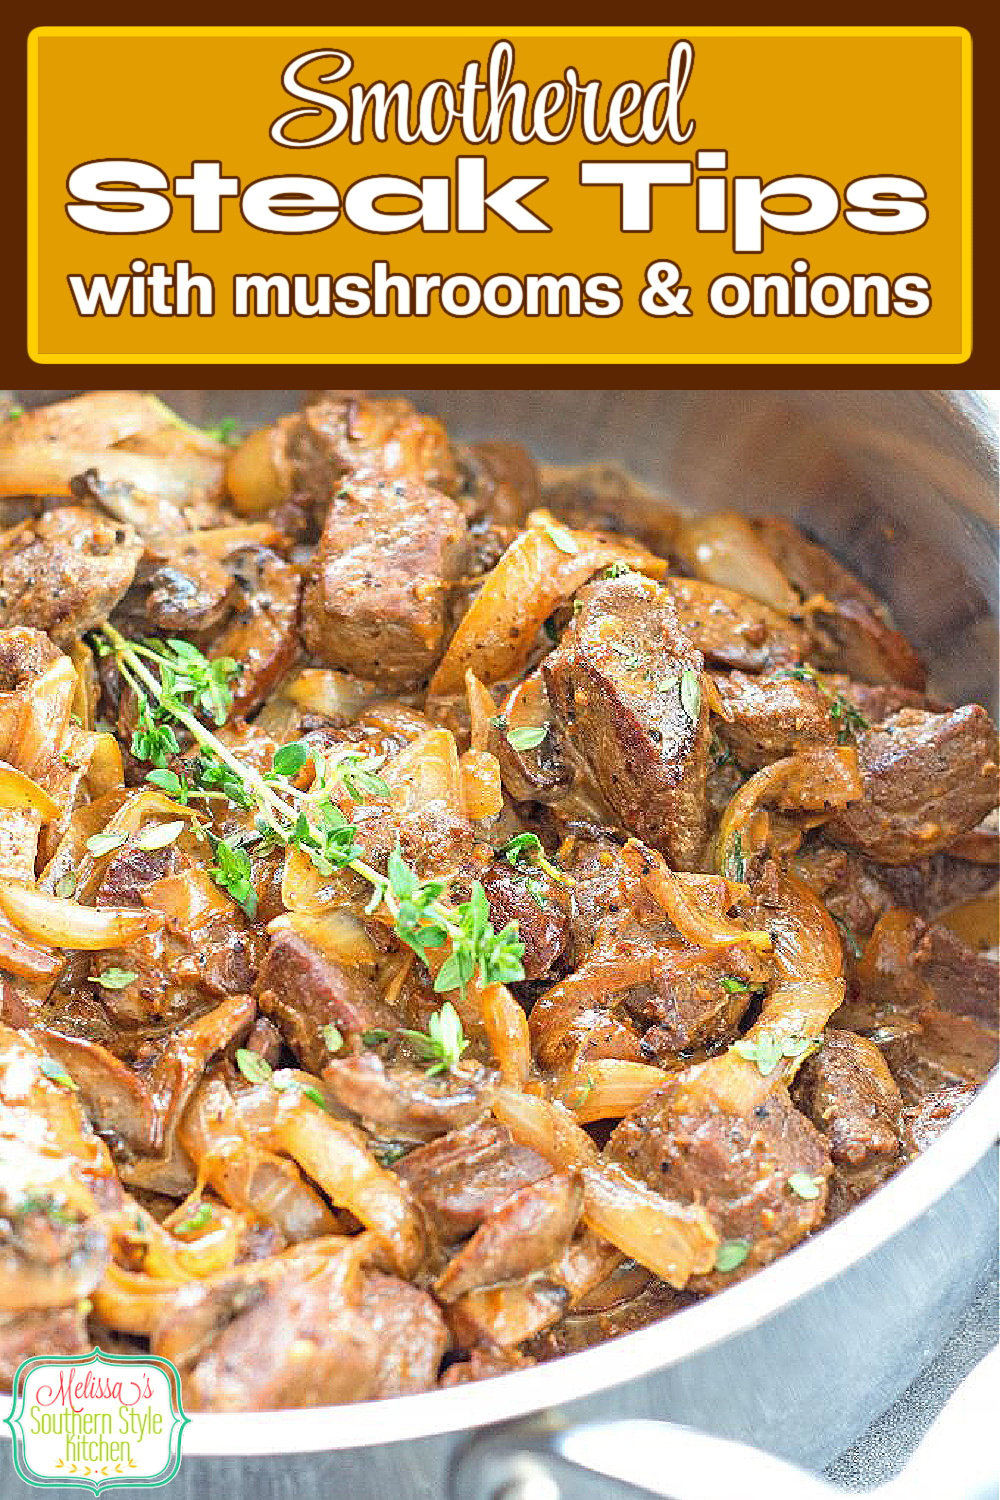 Your family will swoon for these tender Smothered Steak Tips with mushrooms and onions #steak #steakrecipes #beststeakrecipes #beef #dinner #dinnerideas #easyrecipes #southnernrecipe #dinnerideas via @melissasssk